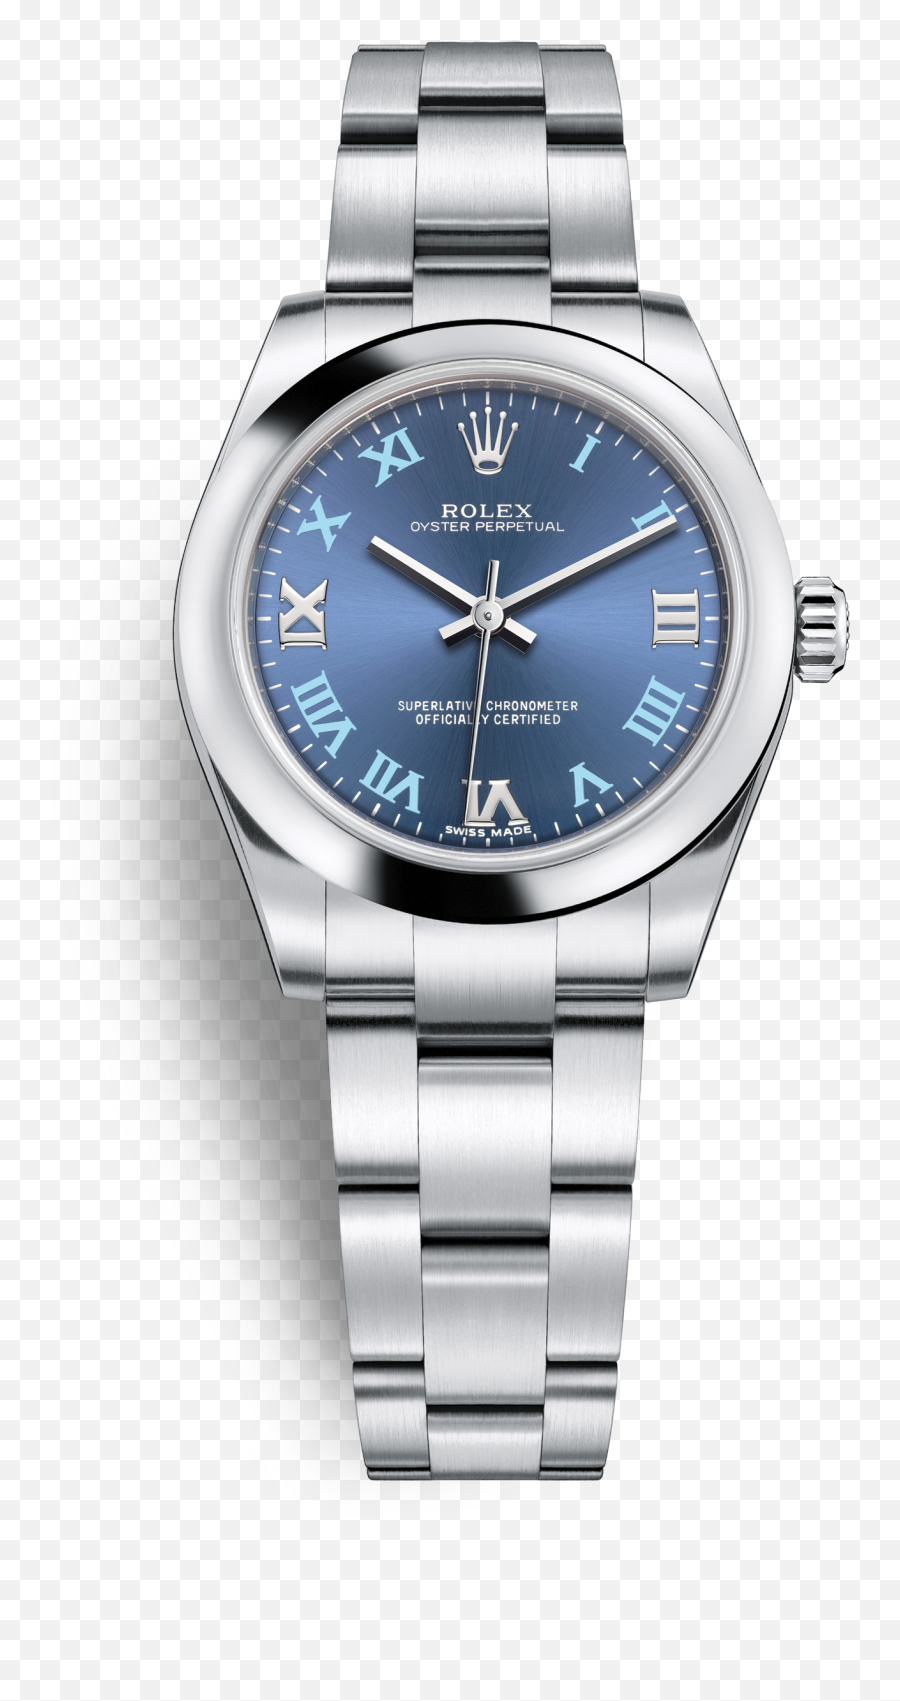 Download Rolex Watch Png Image With - Rolex Oyster Perpetual 34mm Violet,Rolex Watch Png